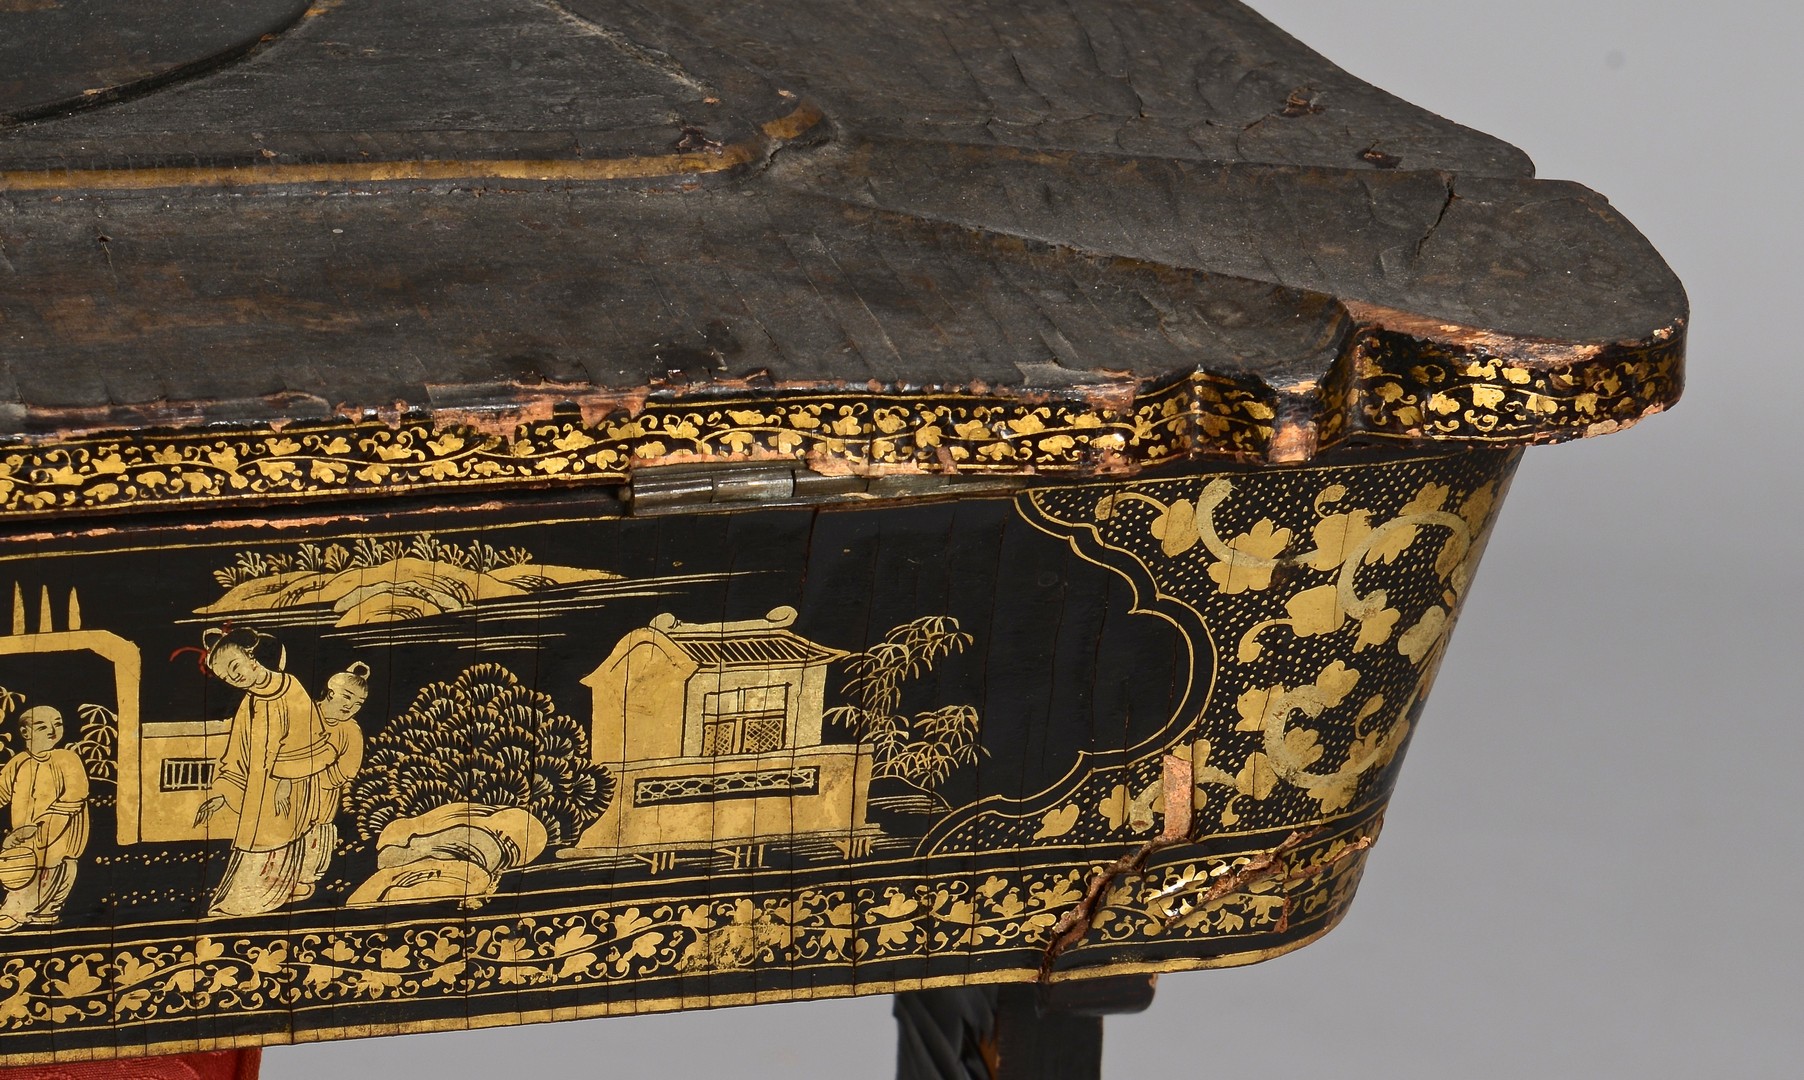 Lot 29: Chinese Lacquer Sewing Table w/ Gilt Decoration w/